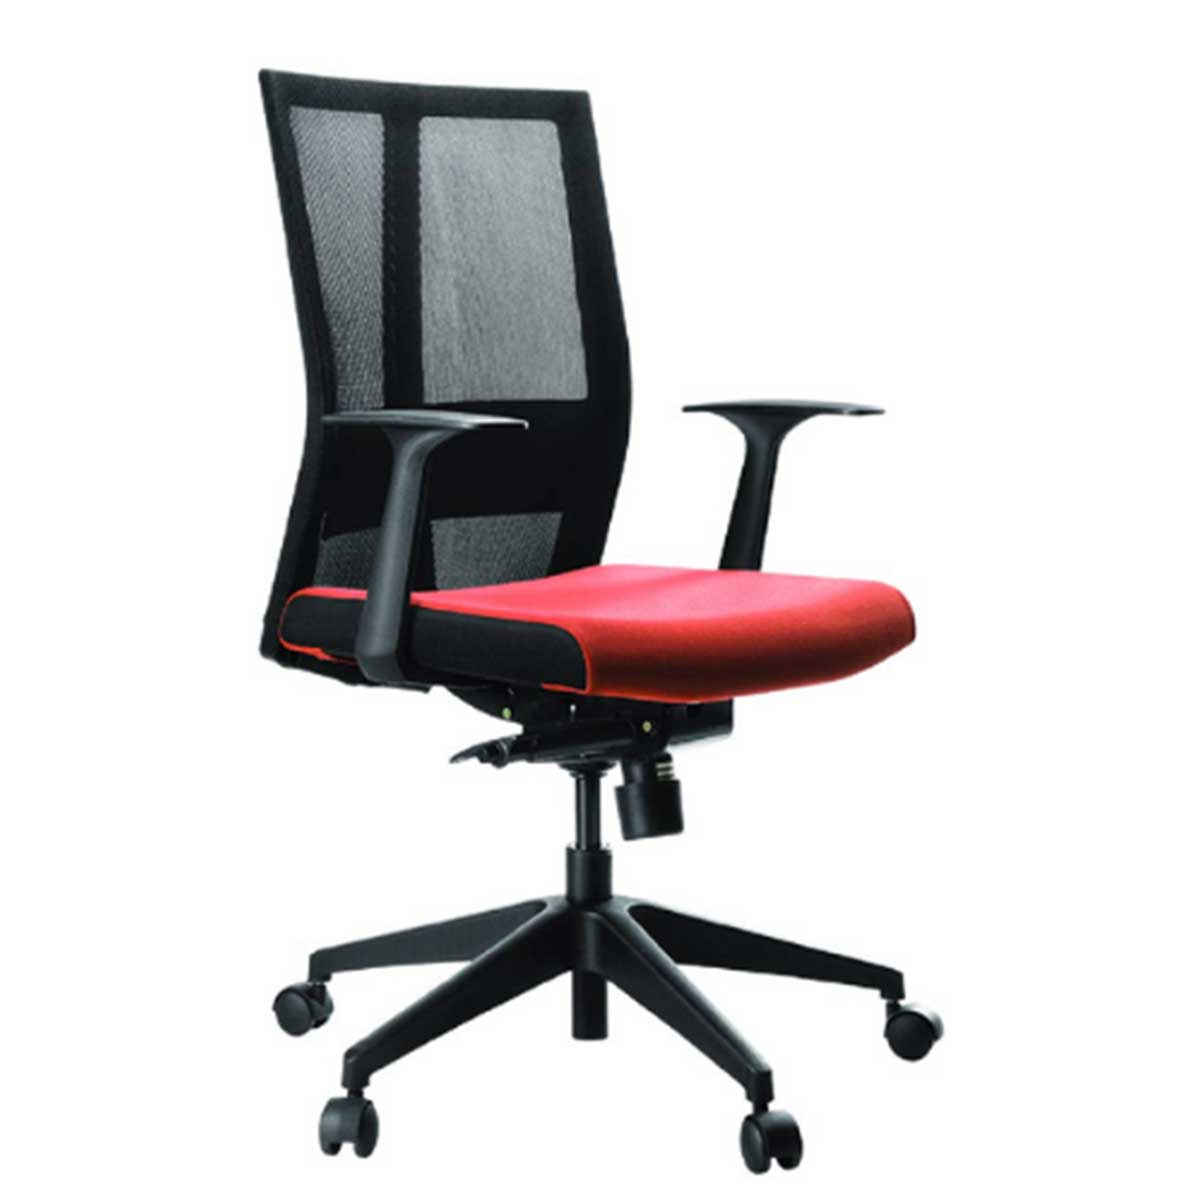 Conference Chair Manufacturers, Suppliers in Noida Sector 76